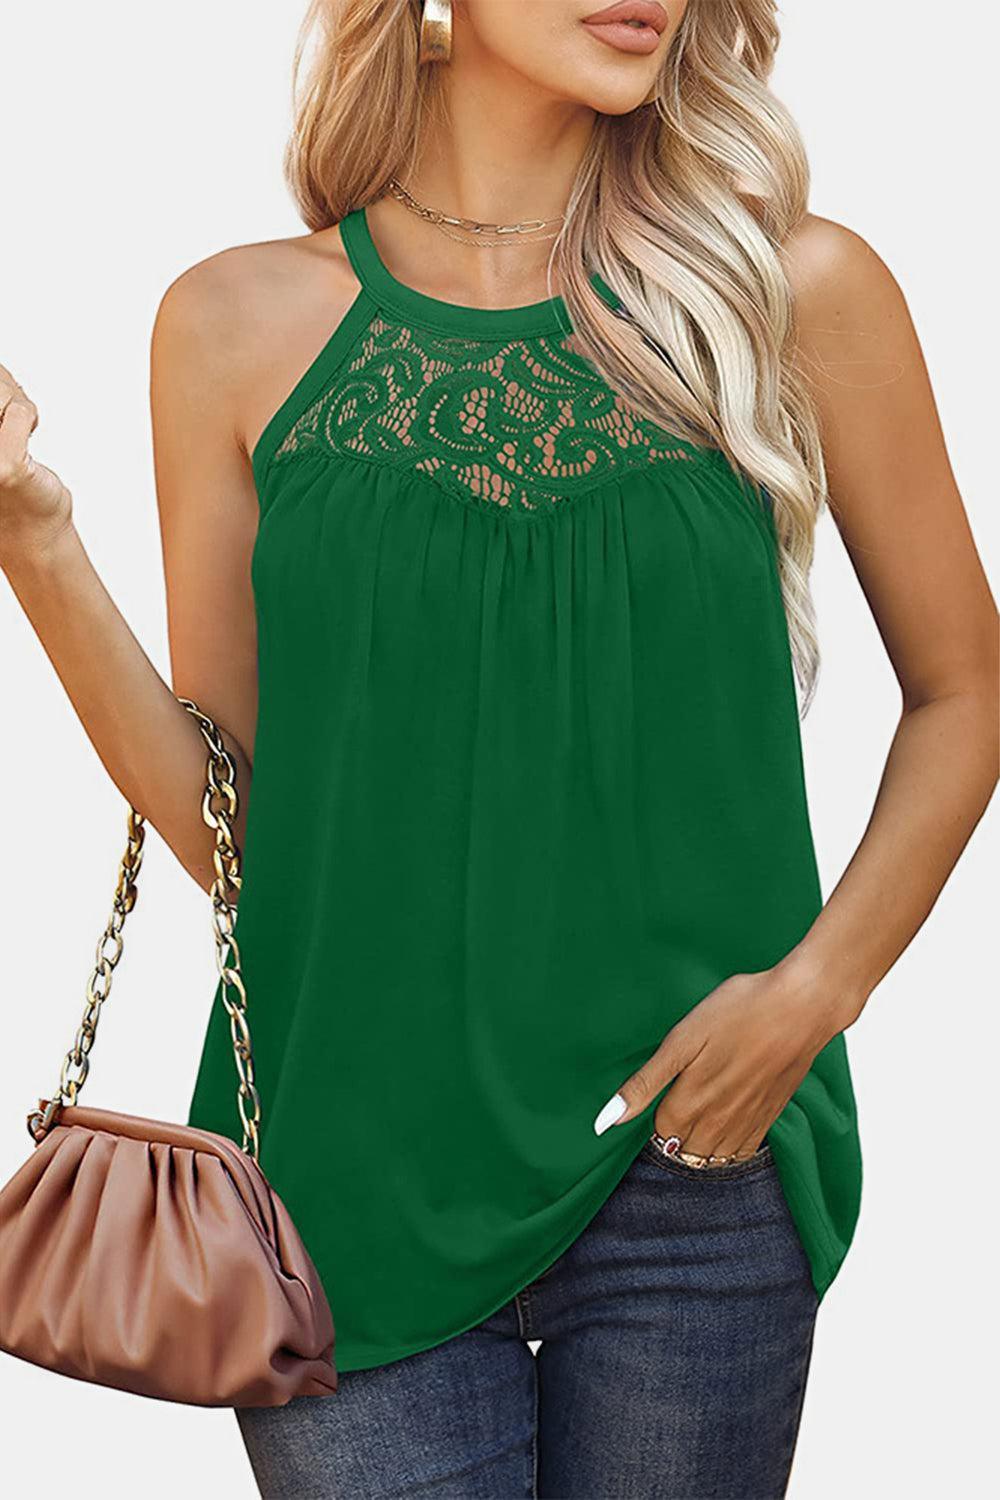 a woman in a green top holding a purse